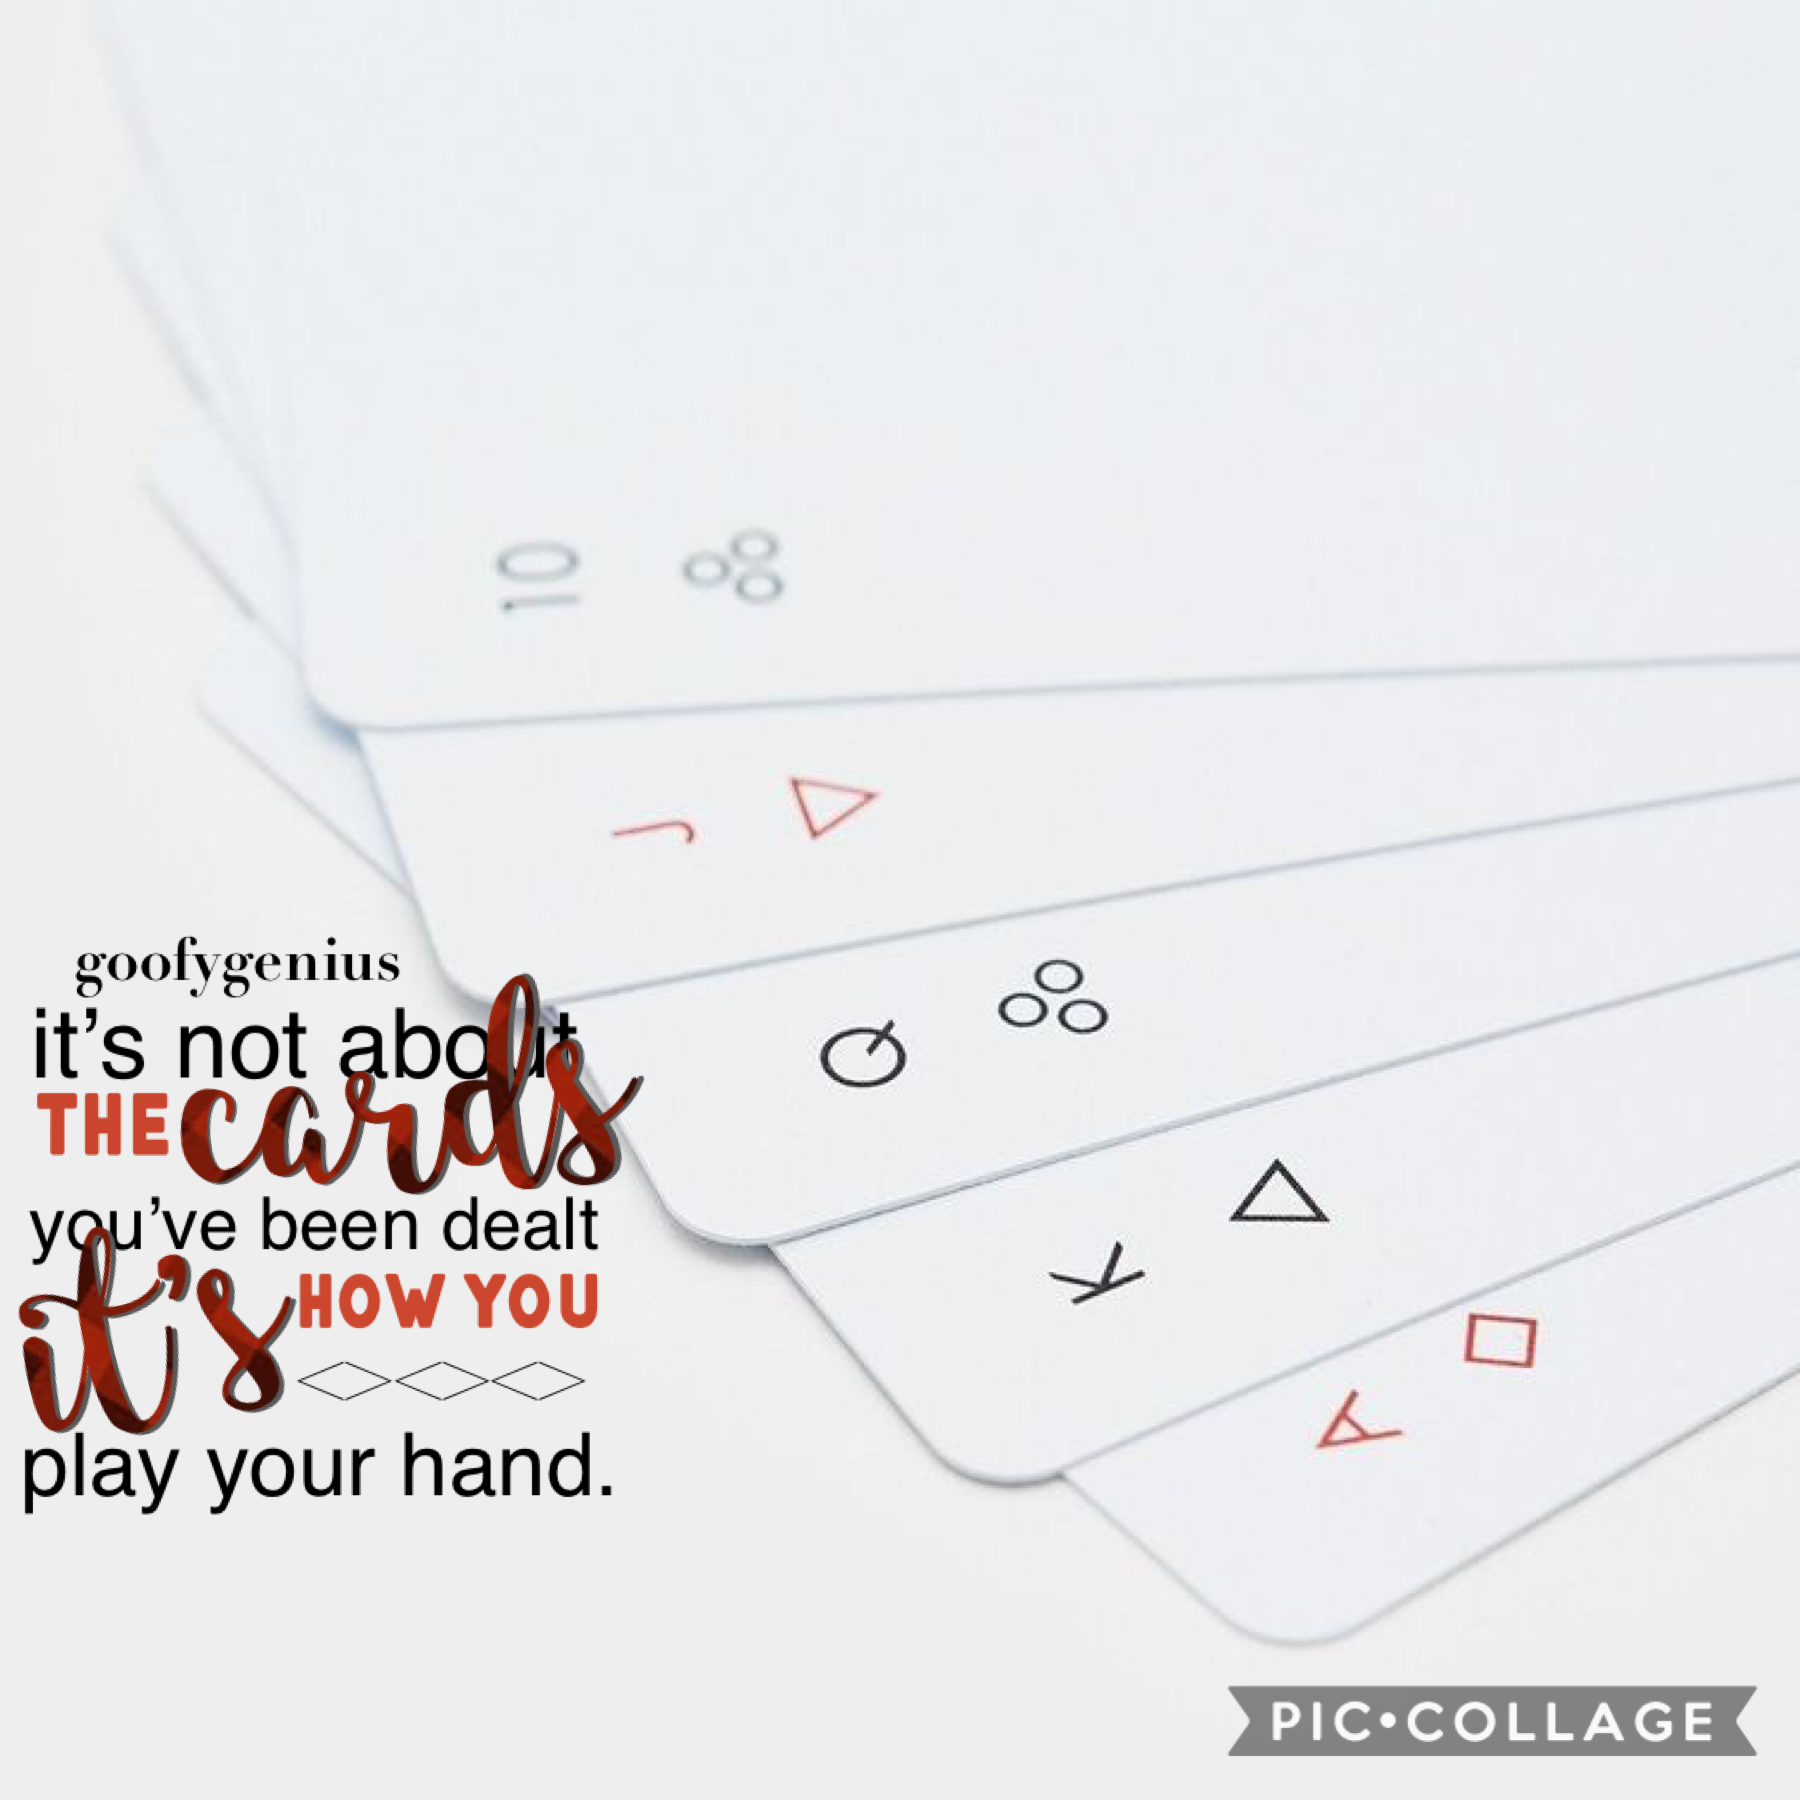 ♠️ Tap Here ♠️
Gotta love a good drop shadow on text 😌 I just finished writing a 3000+ letter to my crush that I will never send. Why the heck do I have so many things to say? I guess I’ll never know. I’m going to edit it since I just love procrastinating